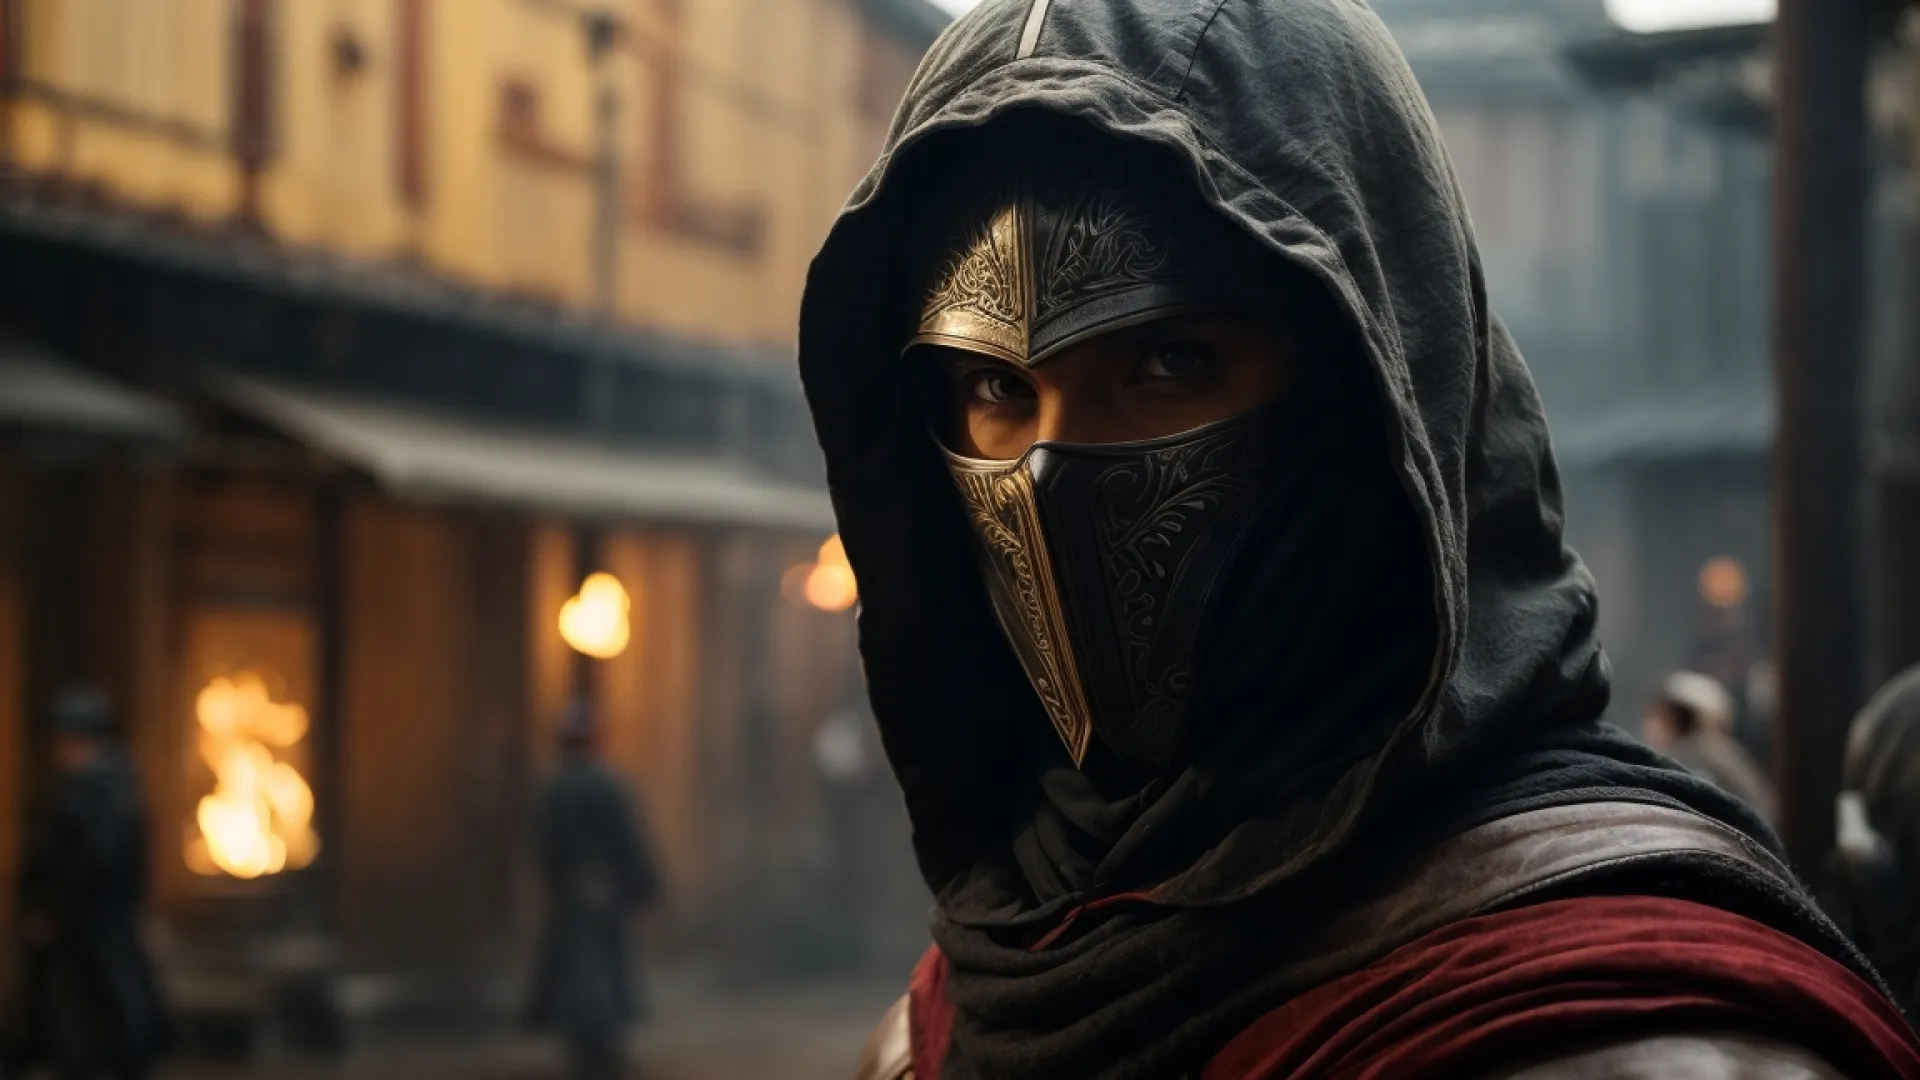 Episode 1: “Assassin’s Creed: Unity – Dead Kings”